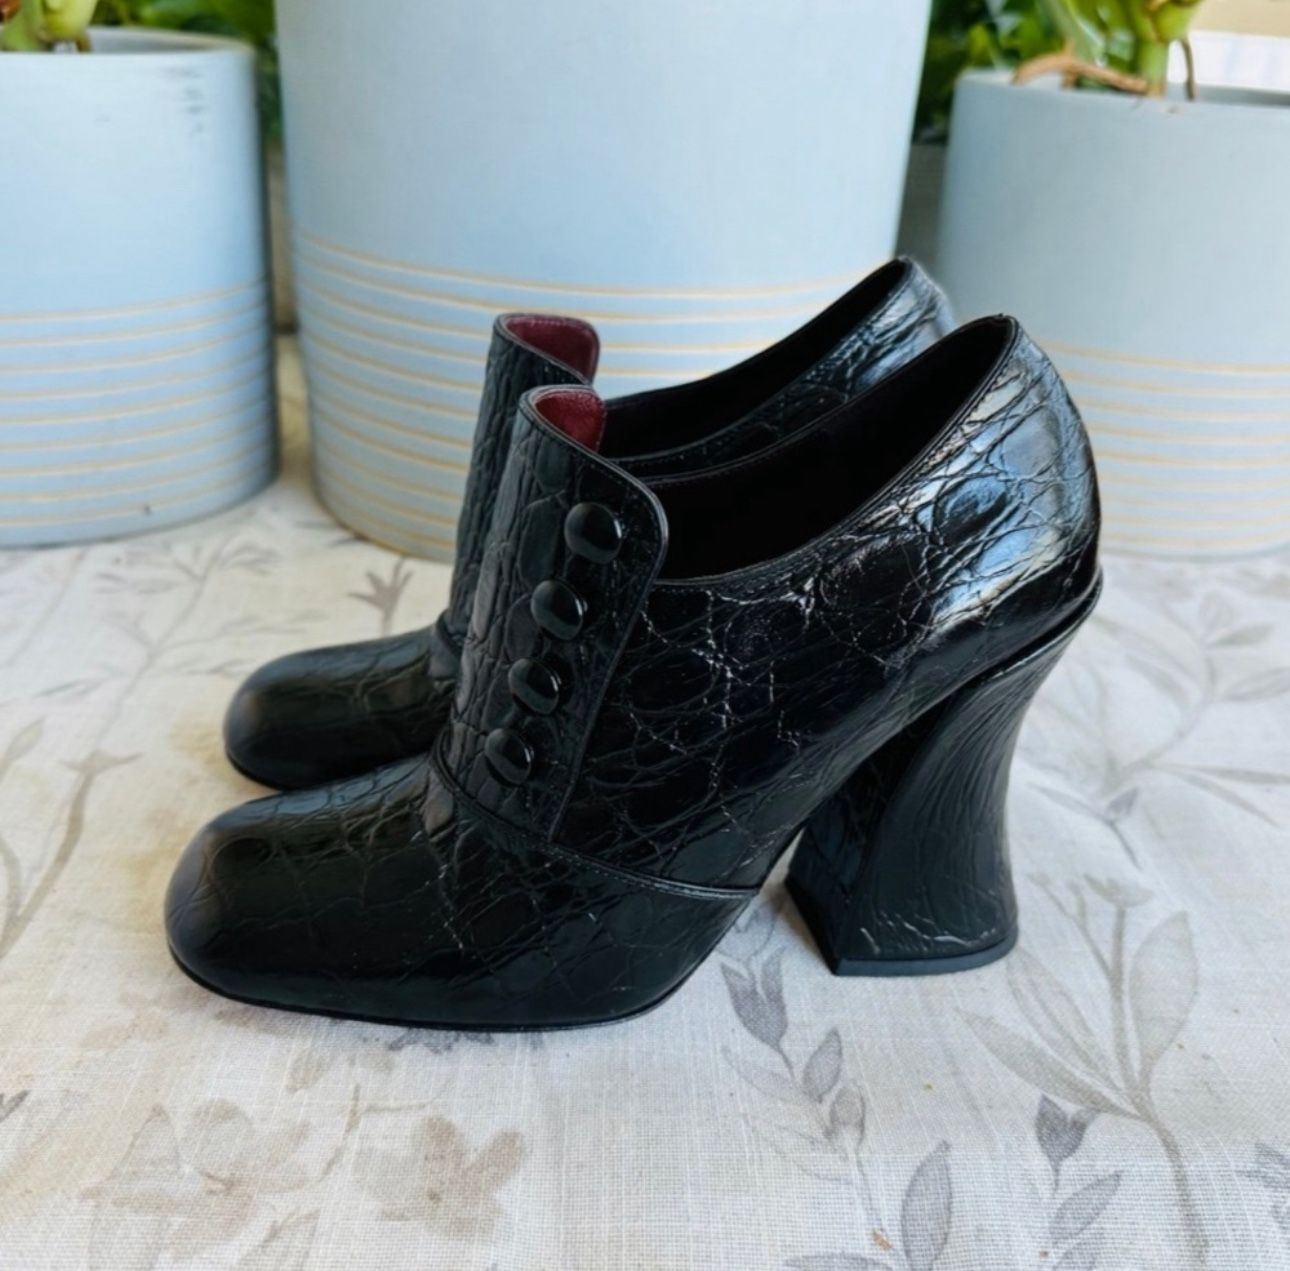 NWOB Marc Jacobs Ankle Boots Brand new size EU 36